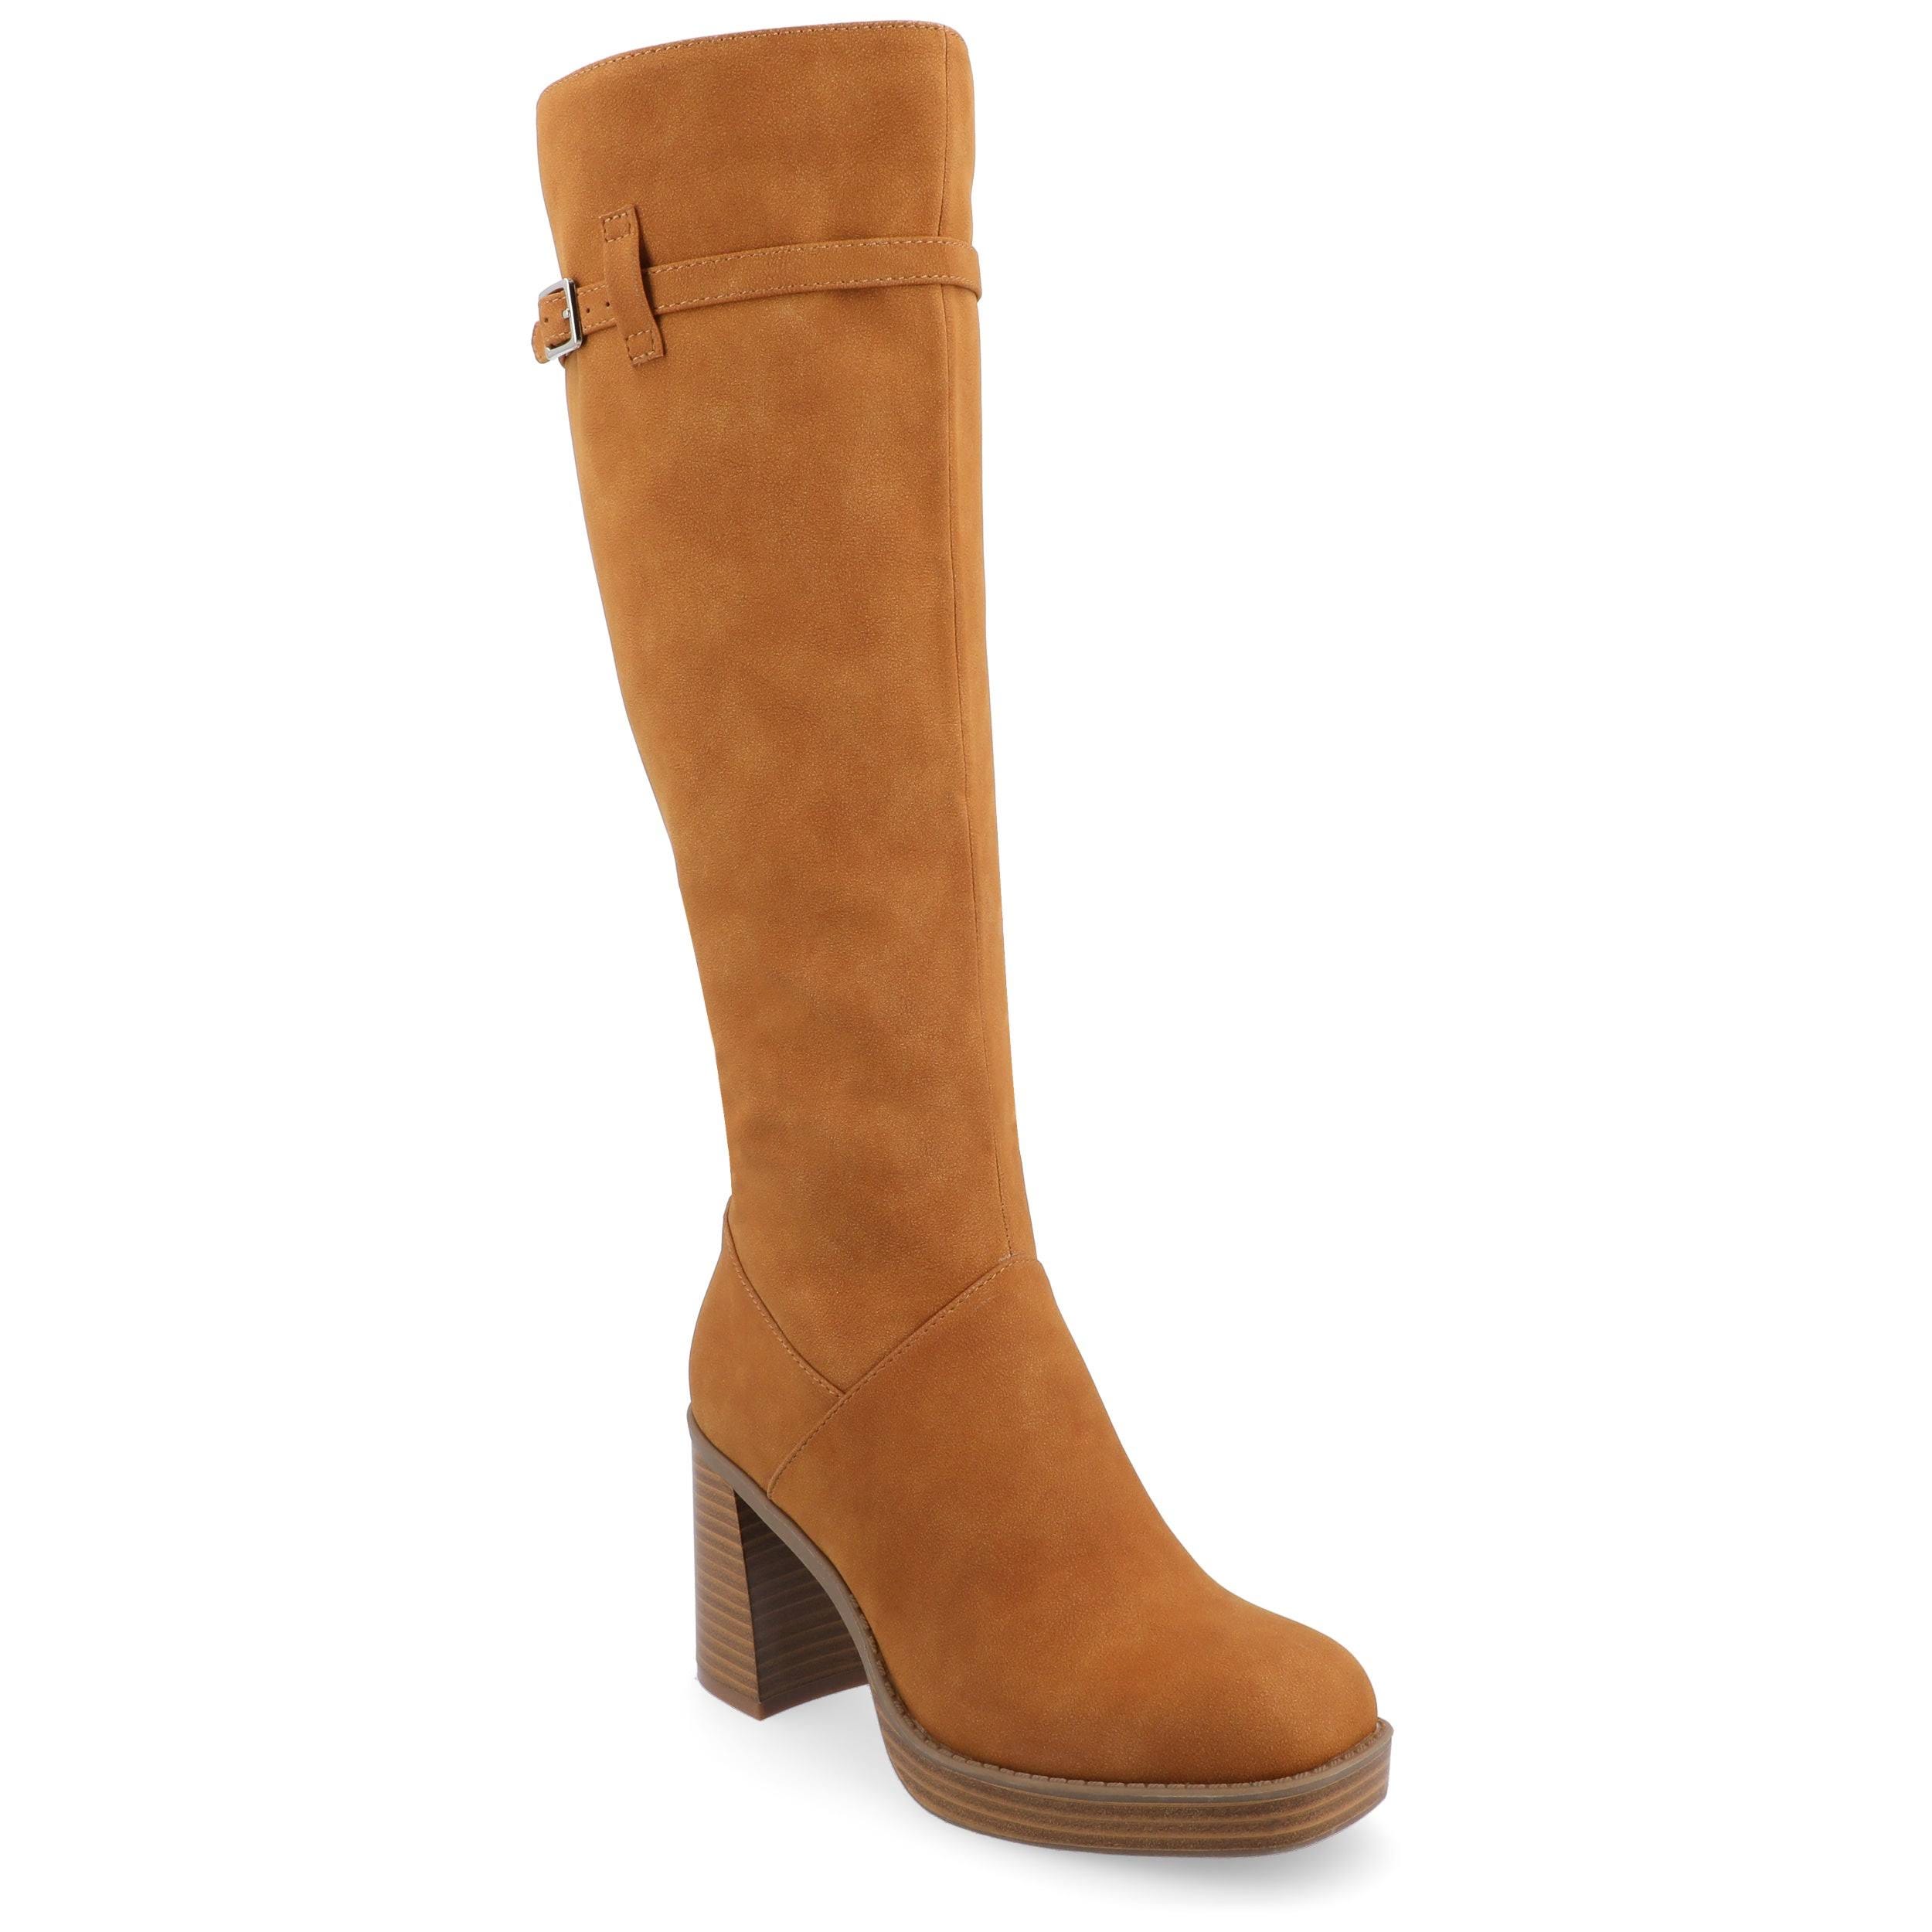 Comfortable Knee-High Platform Boot with Extra-Wide Calf and Cushioned Insole | Image